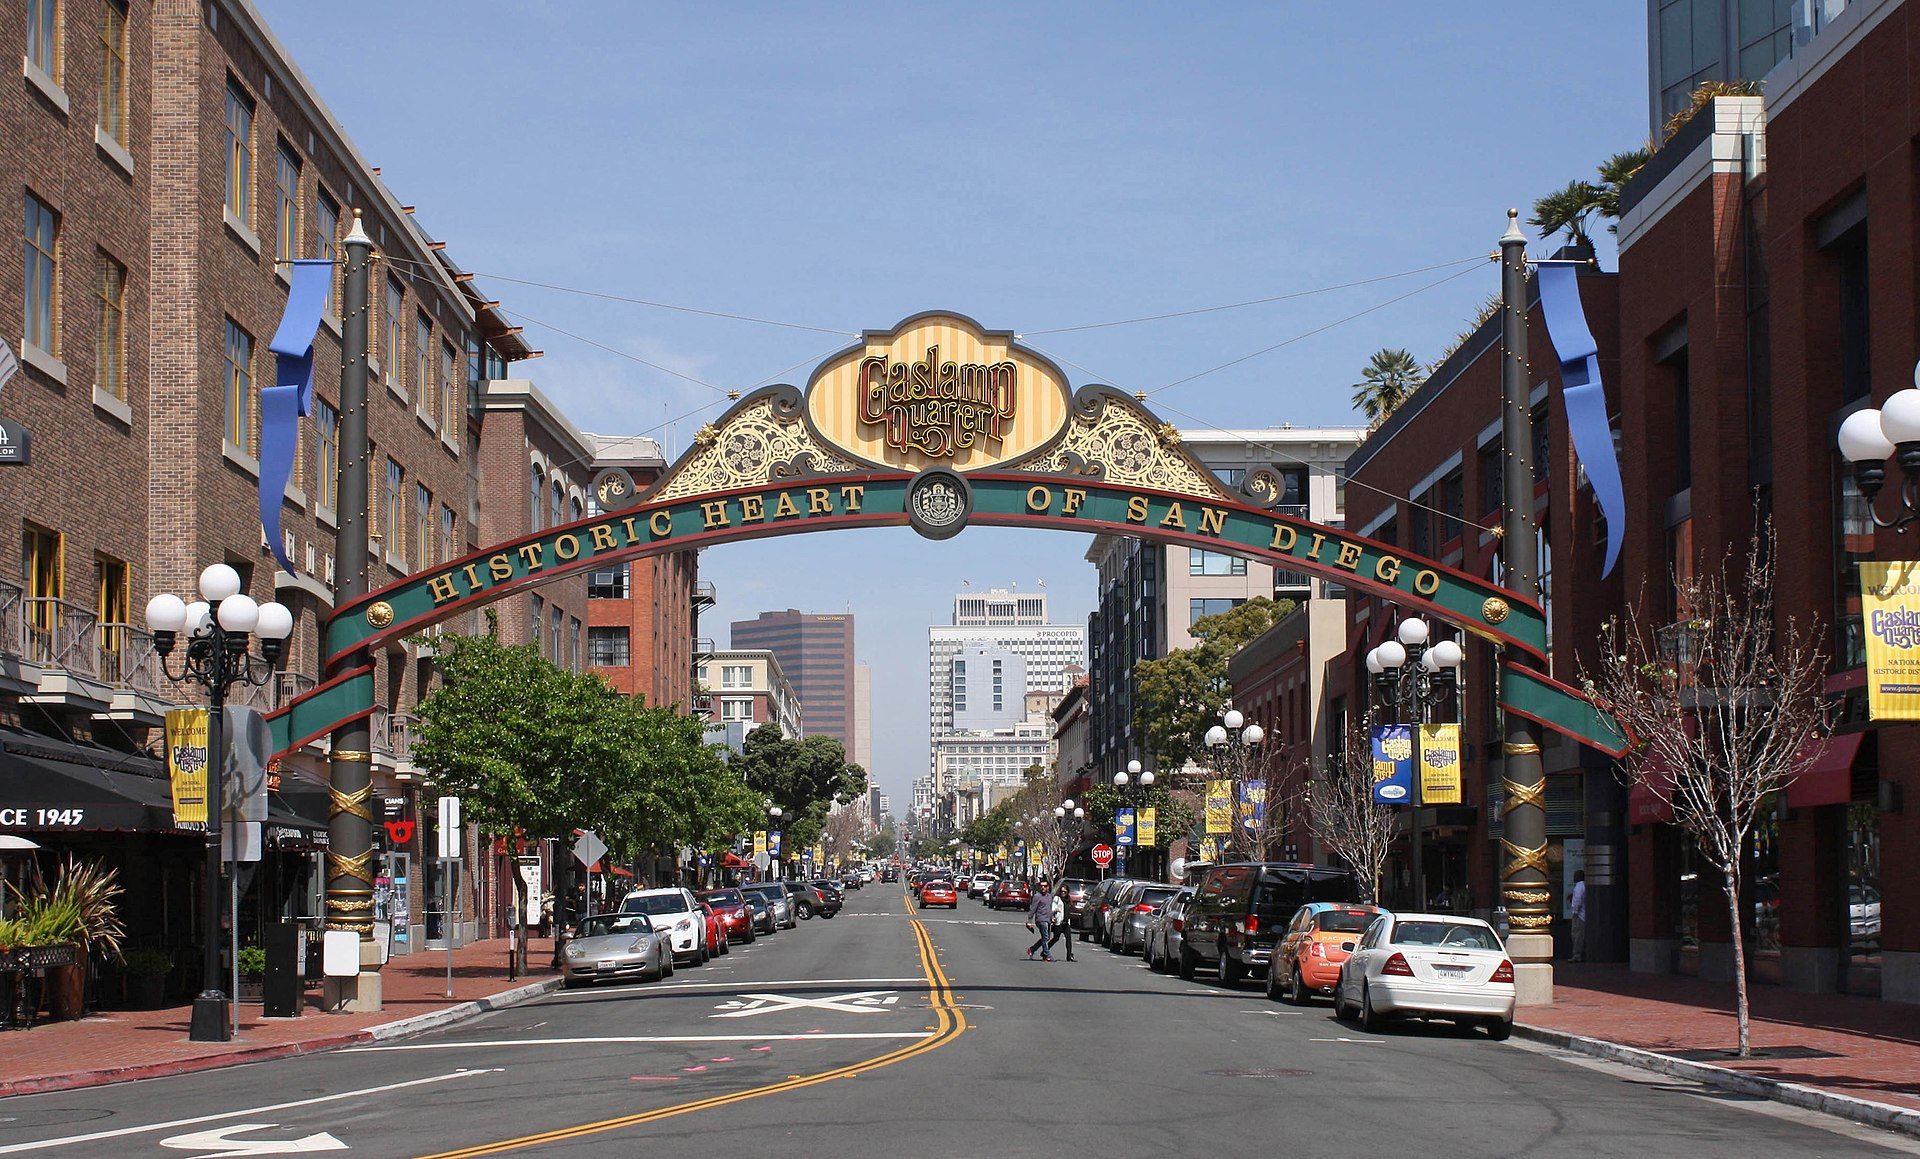 The Gaslamp Quarter sign in San Diego